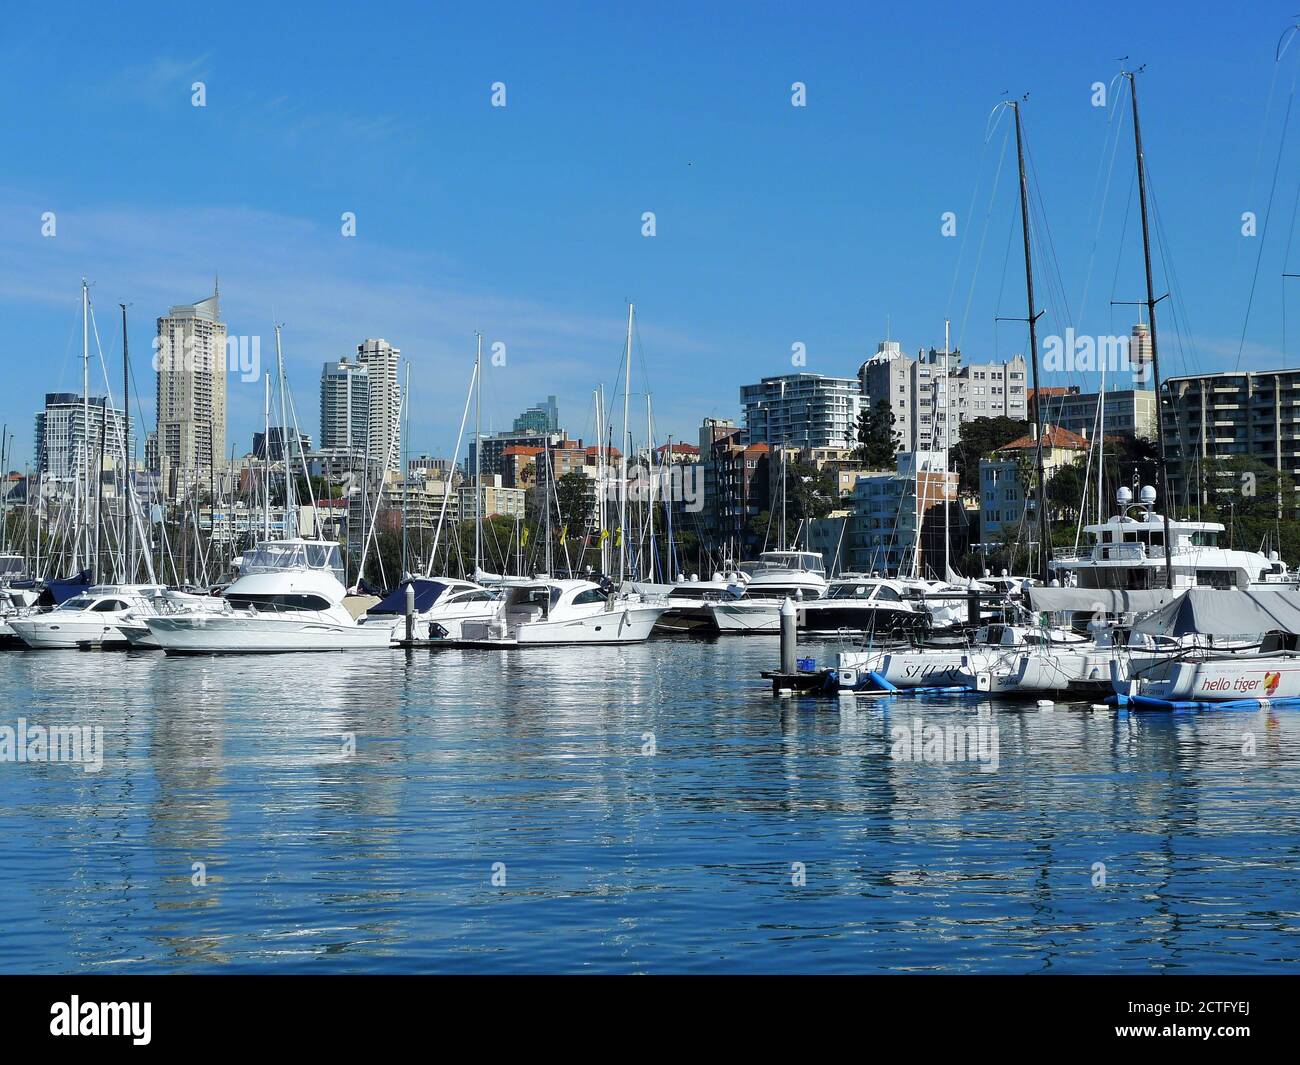 LUXURIOS YACTHS IN A PRIVATE CITY HARBOR Stock Photo